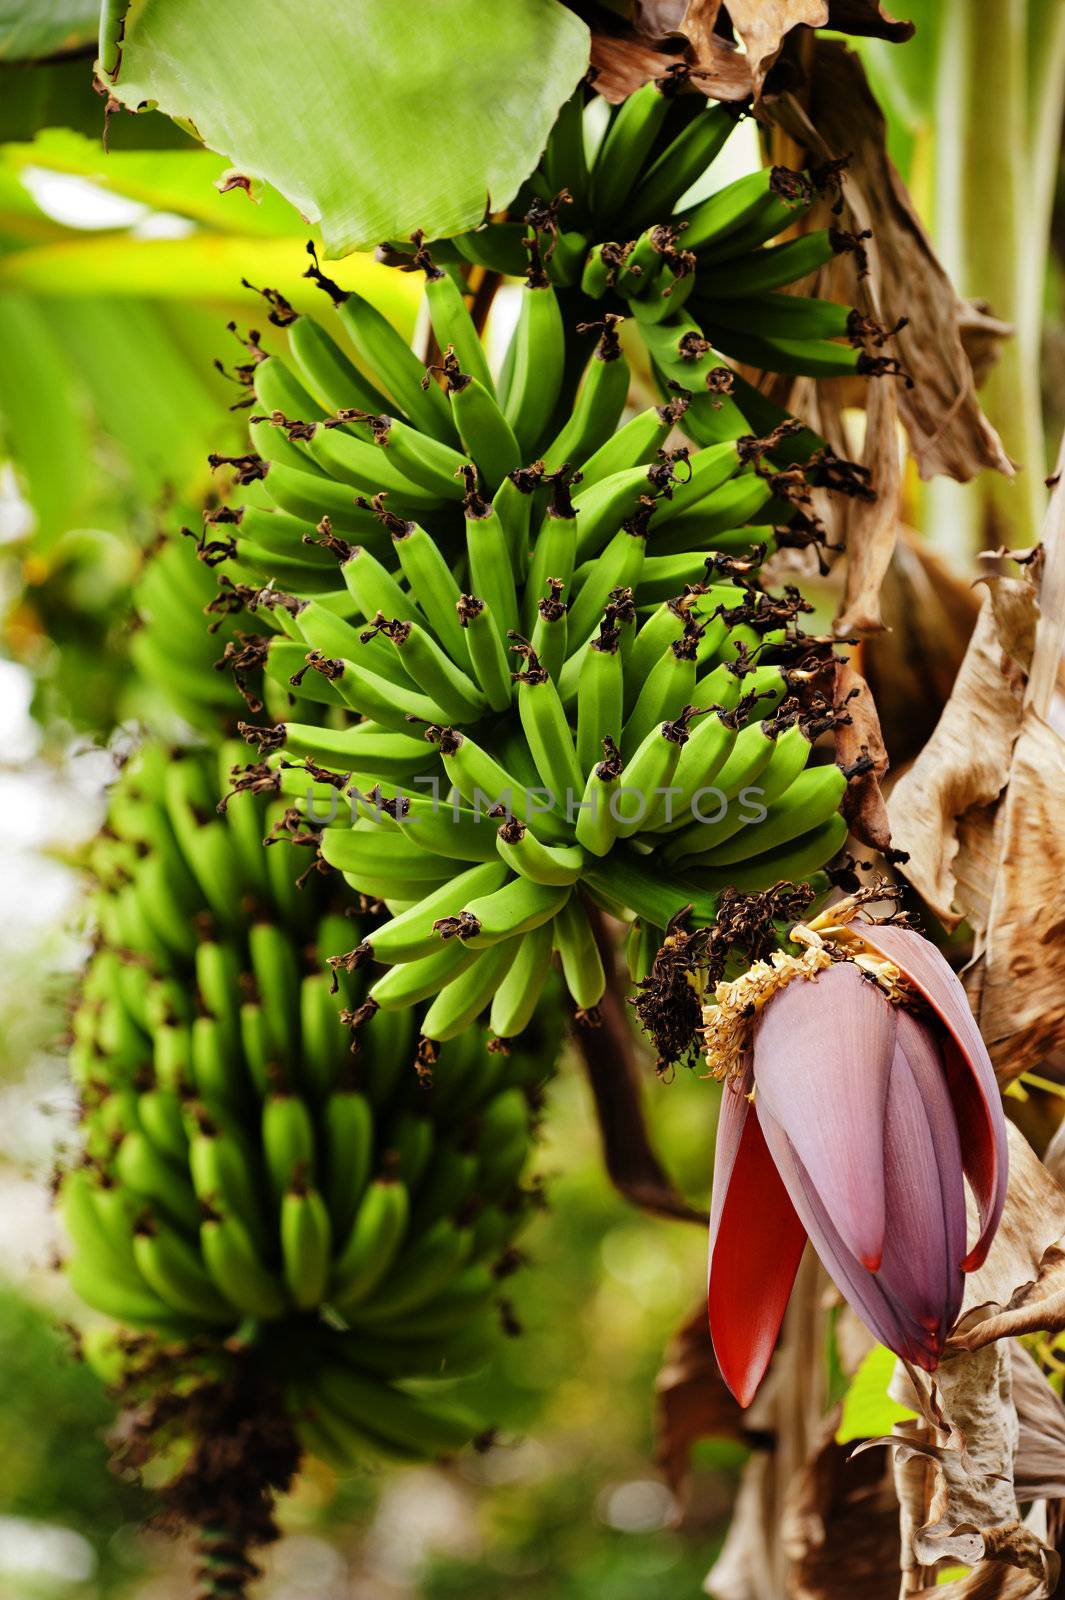 Bunches of green bananas growing on a plantation in Costa Rica.